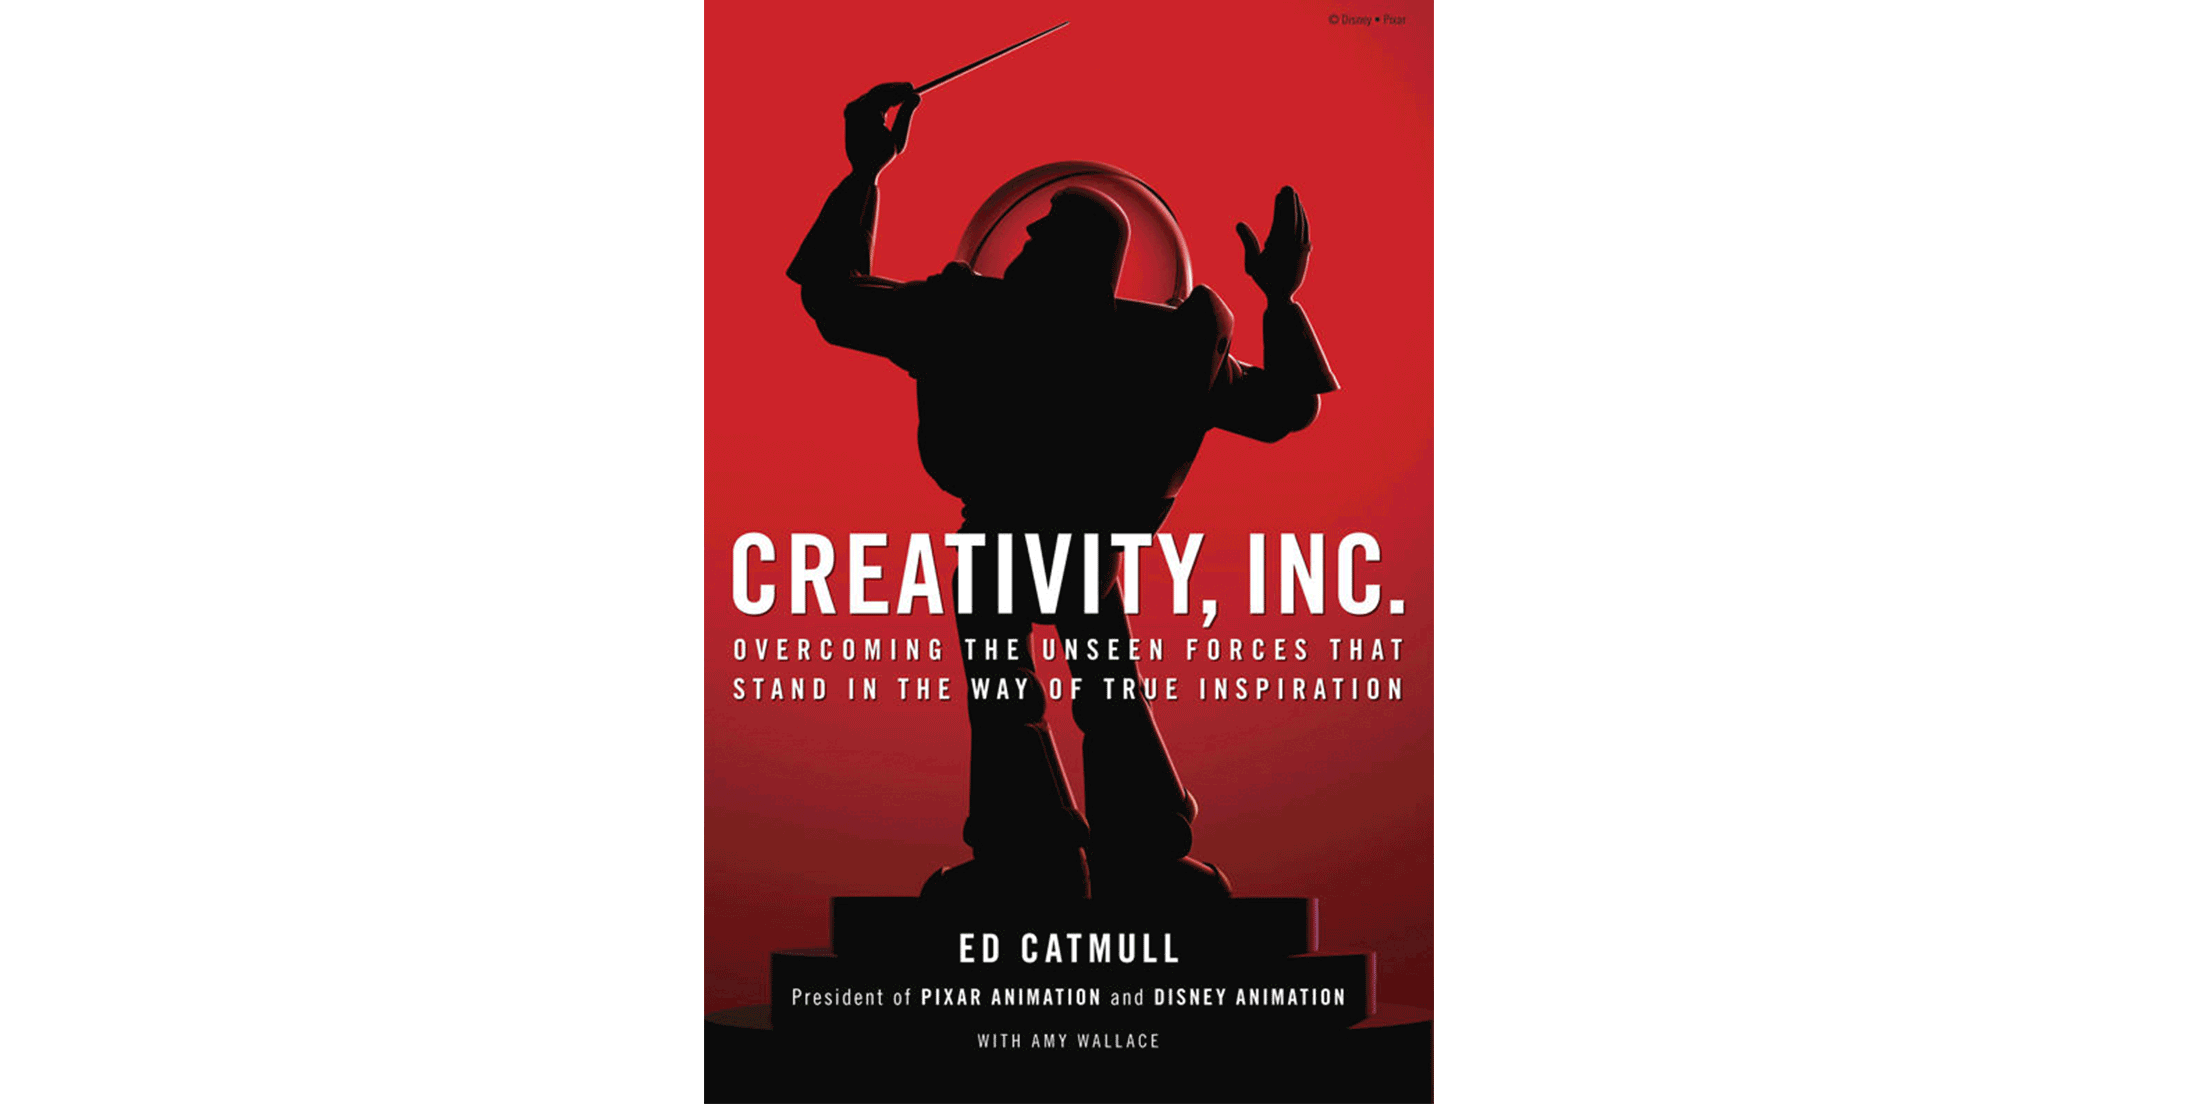 Doist Reading List Creativity, Inc.: Overcoming the Unseen Forces That Stand in the Way of True Inspiration - Ed Catmull & Amy Wallace